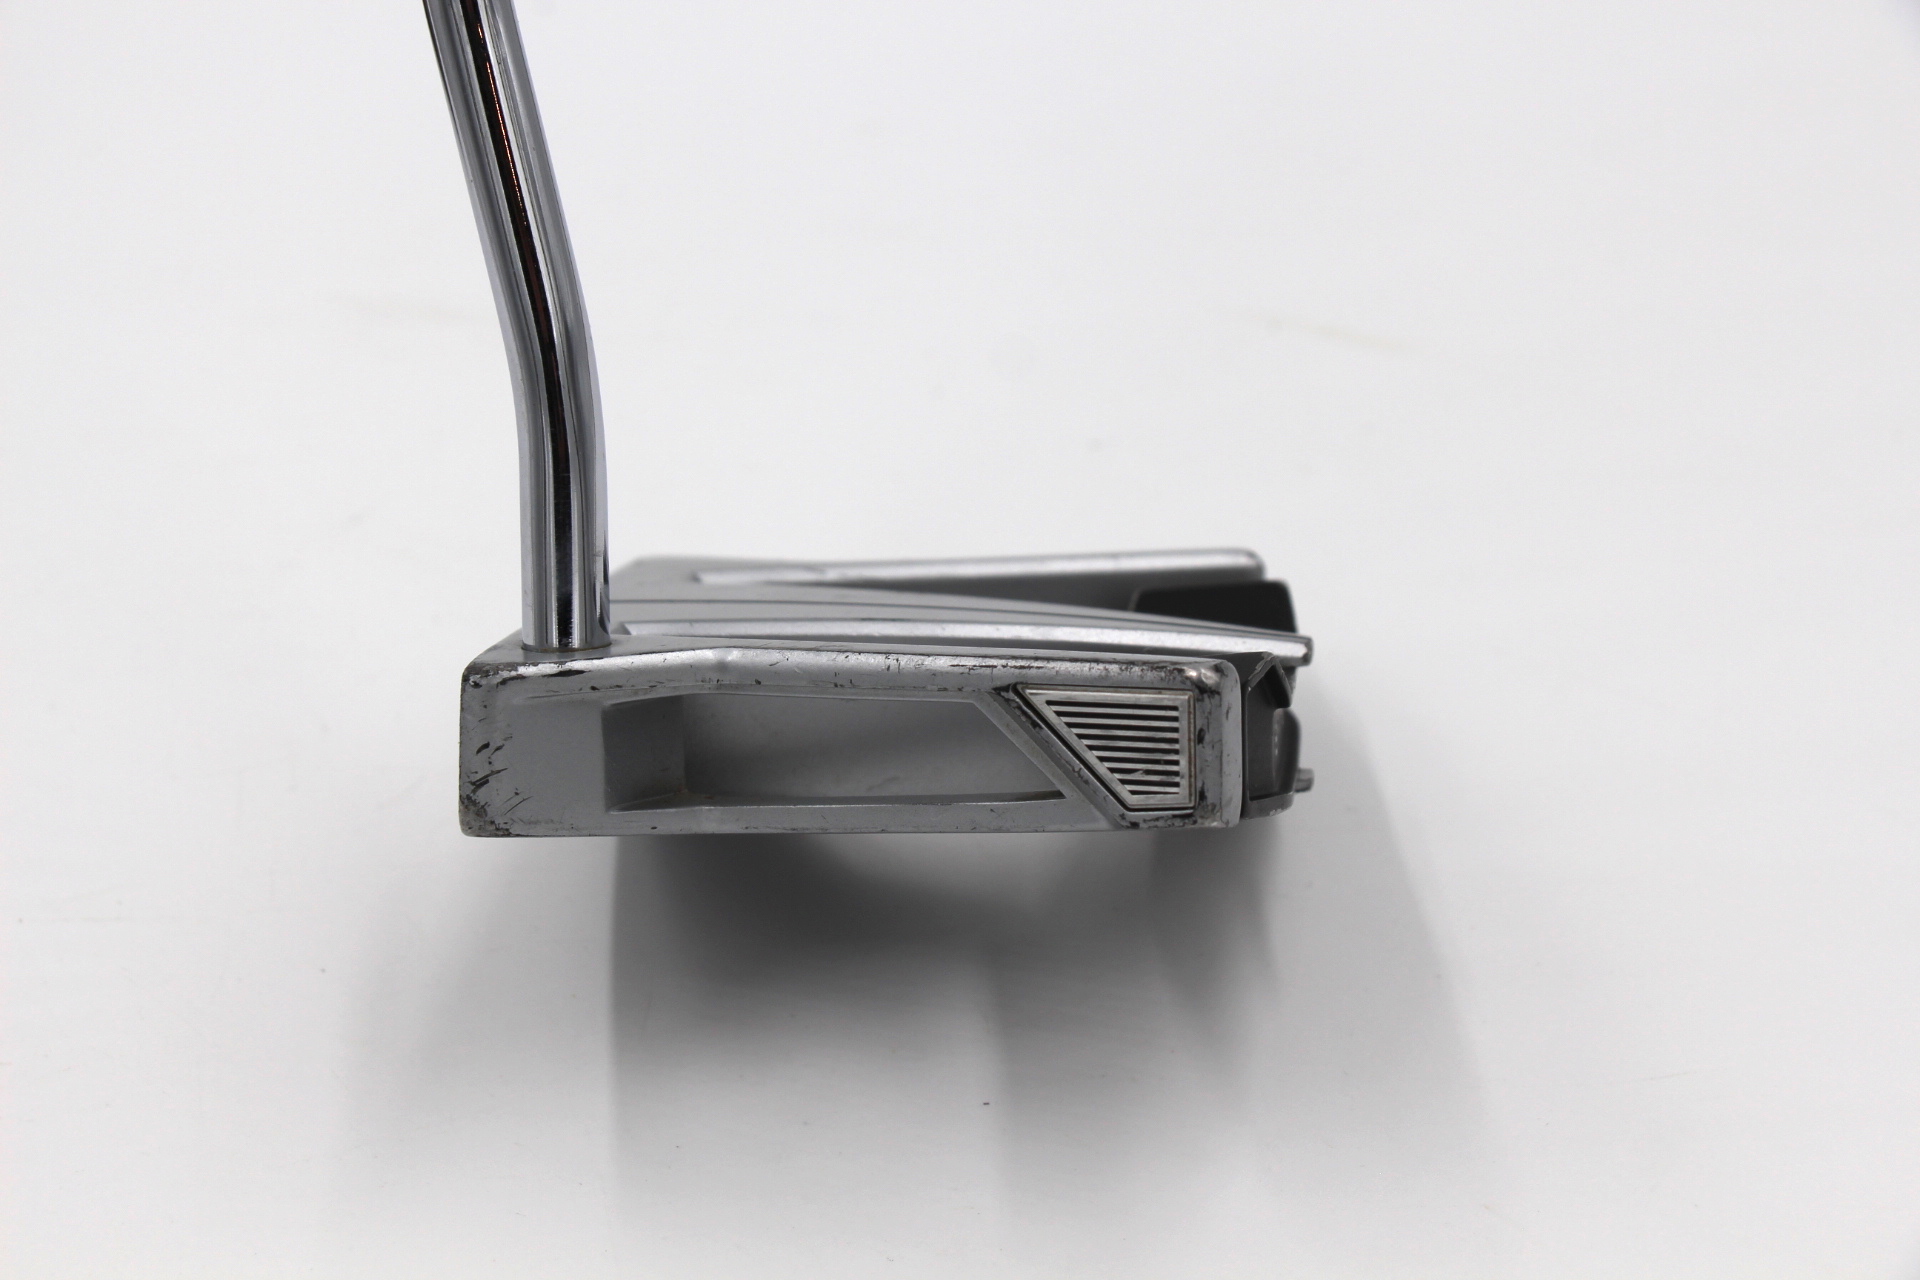 nike method core drone 2.0 putter